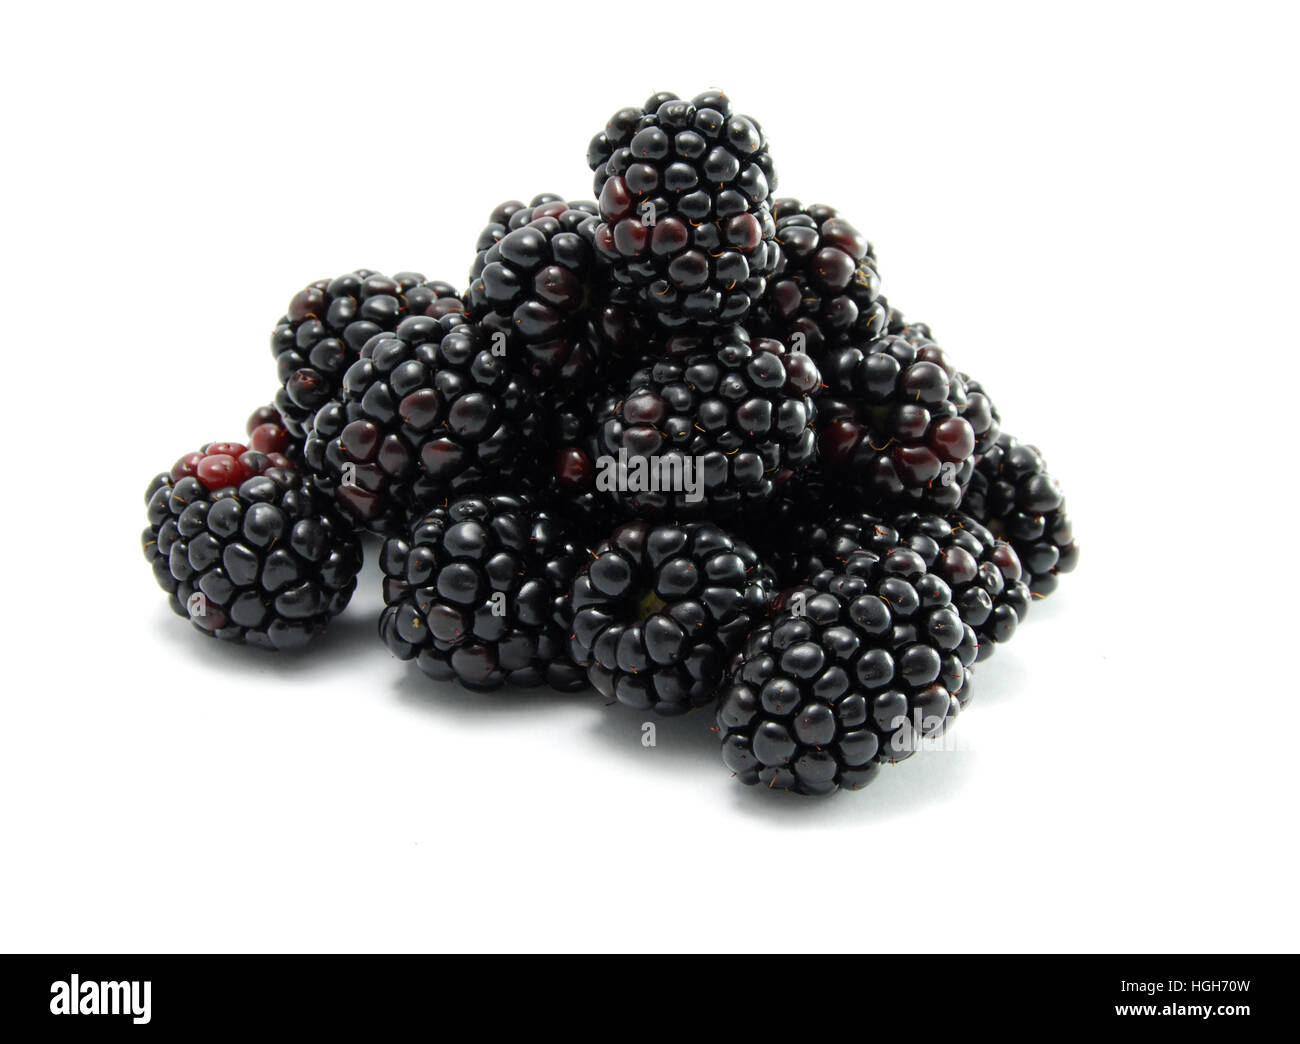 Pile of blackberries. A serving of fruit for a healthy snack or breakfast. Stock Photo